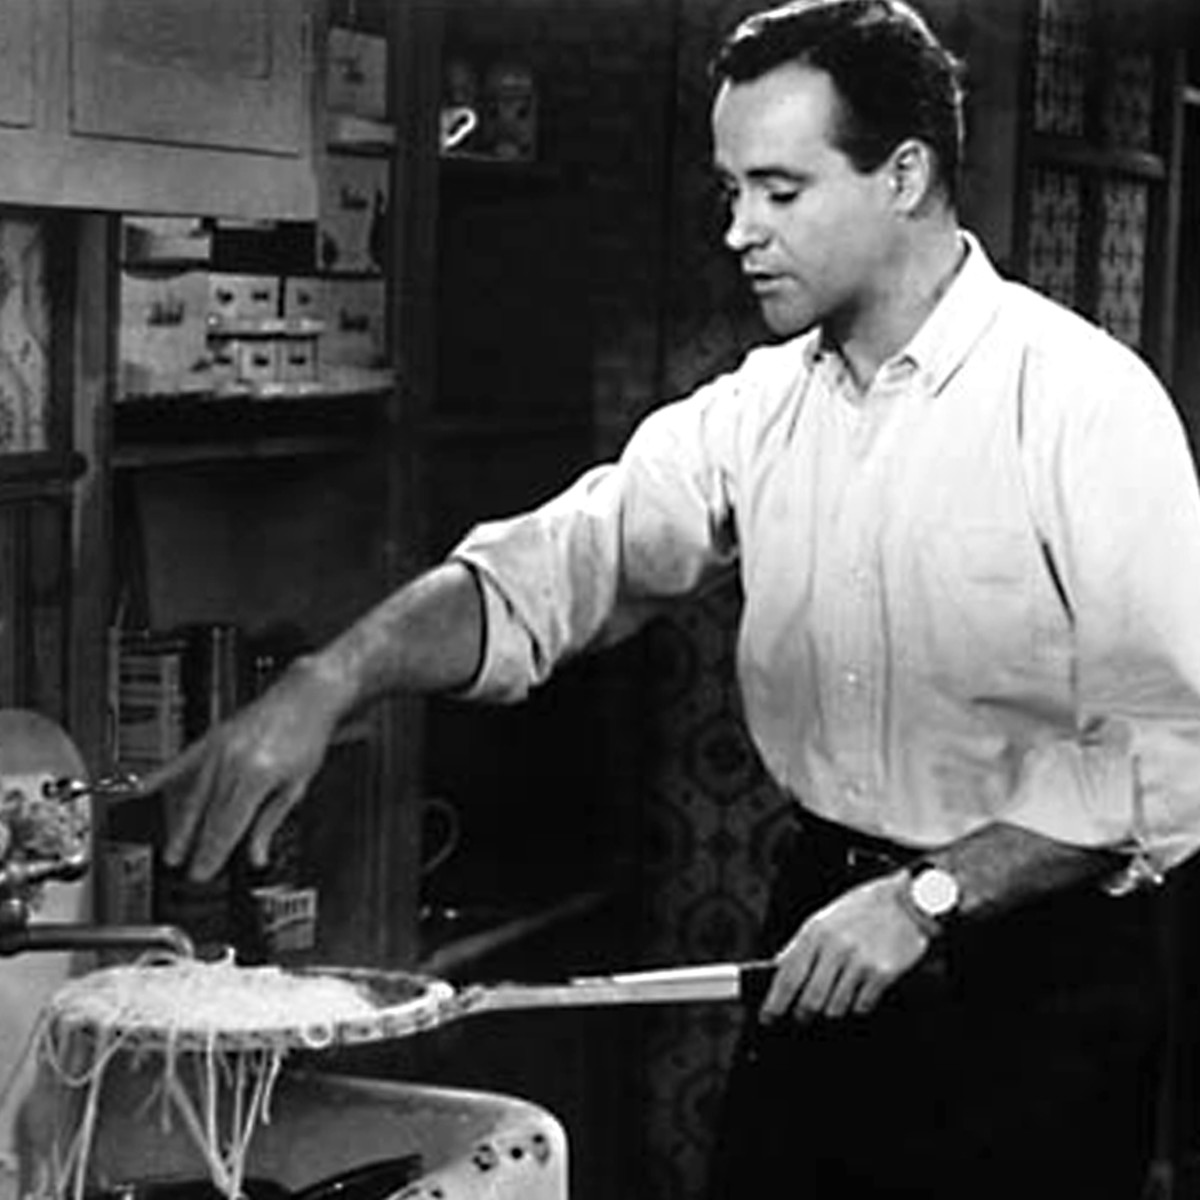 The famous spaghetti straining scene in which C.C Baxter the batchelor improvises with a tennis racquet as a culinary utensil.